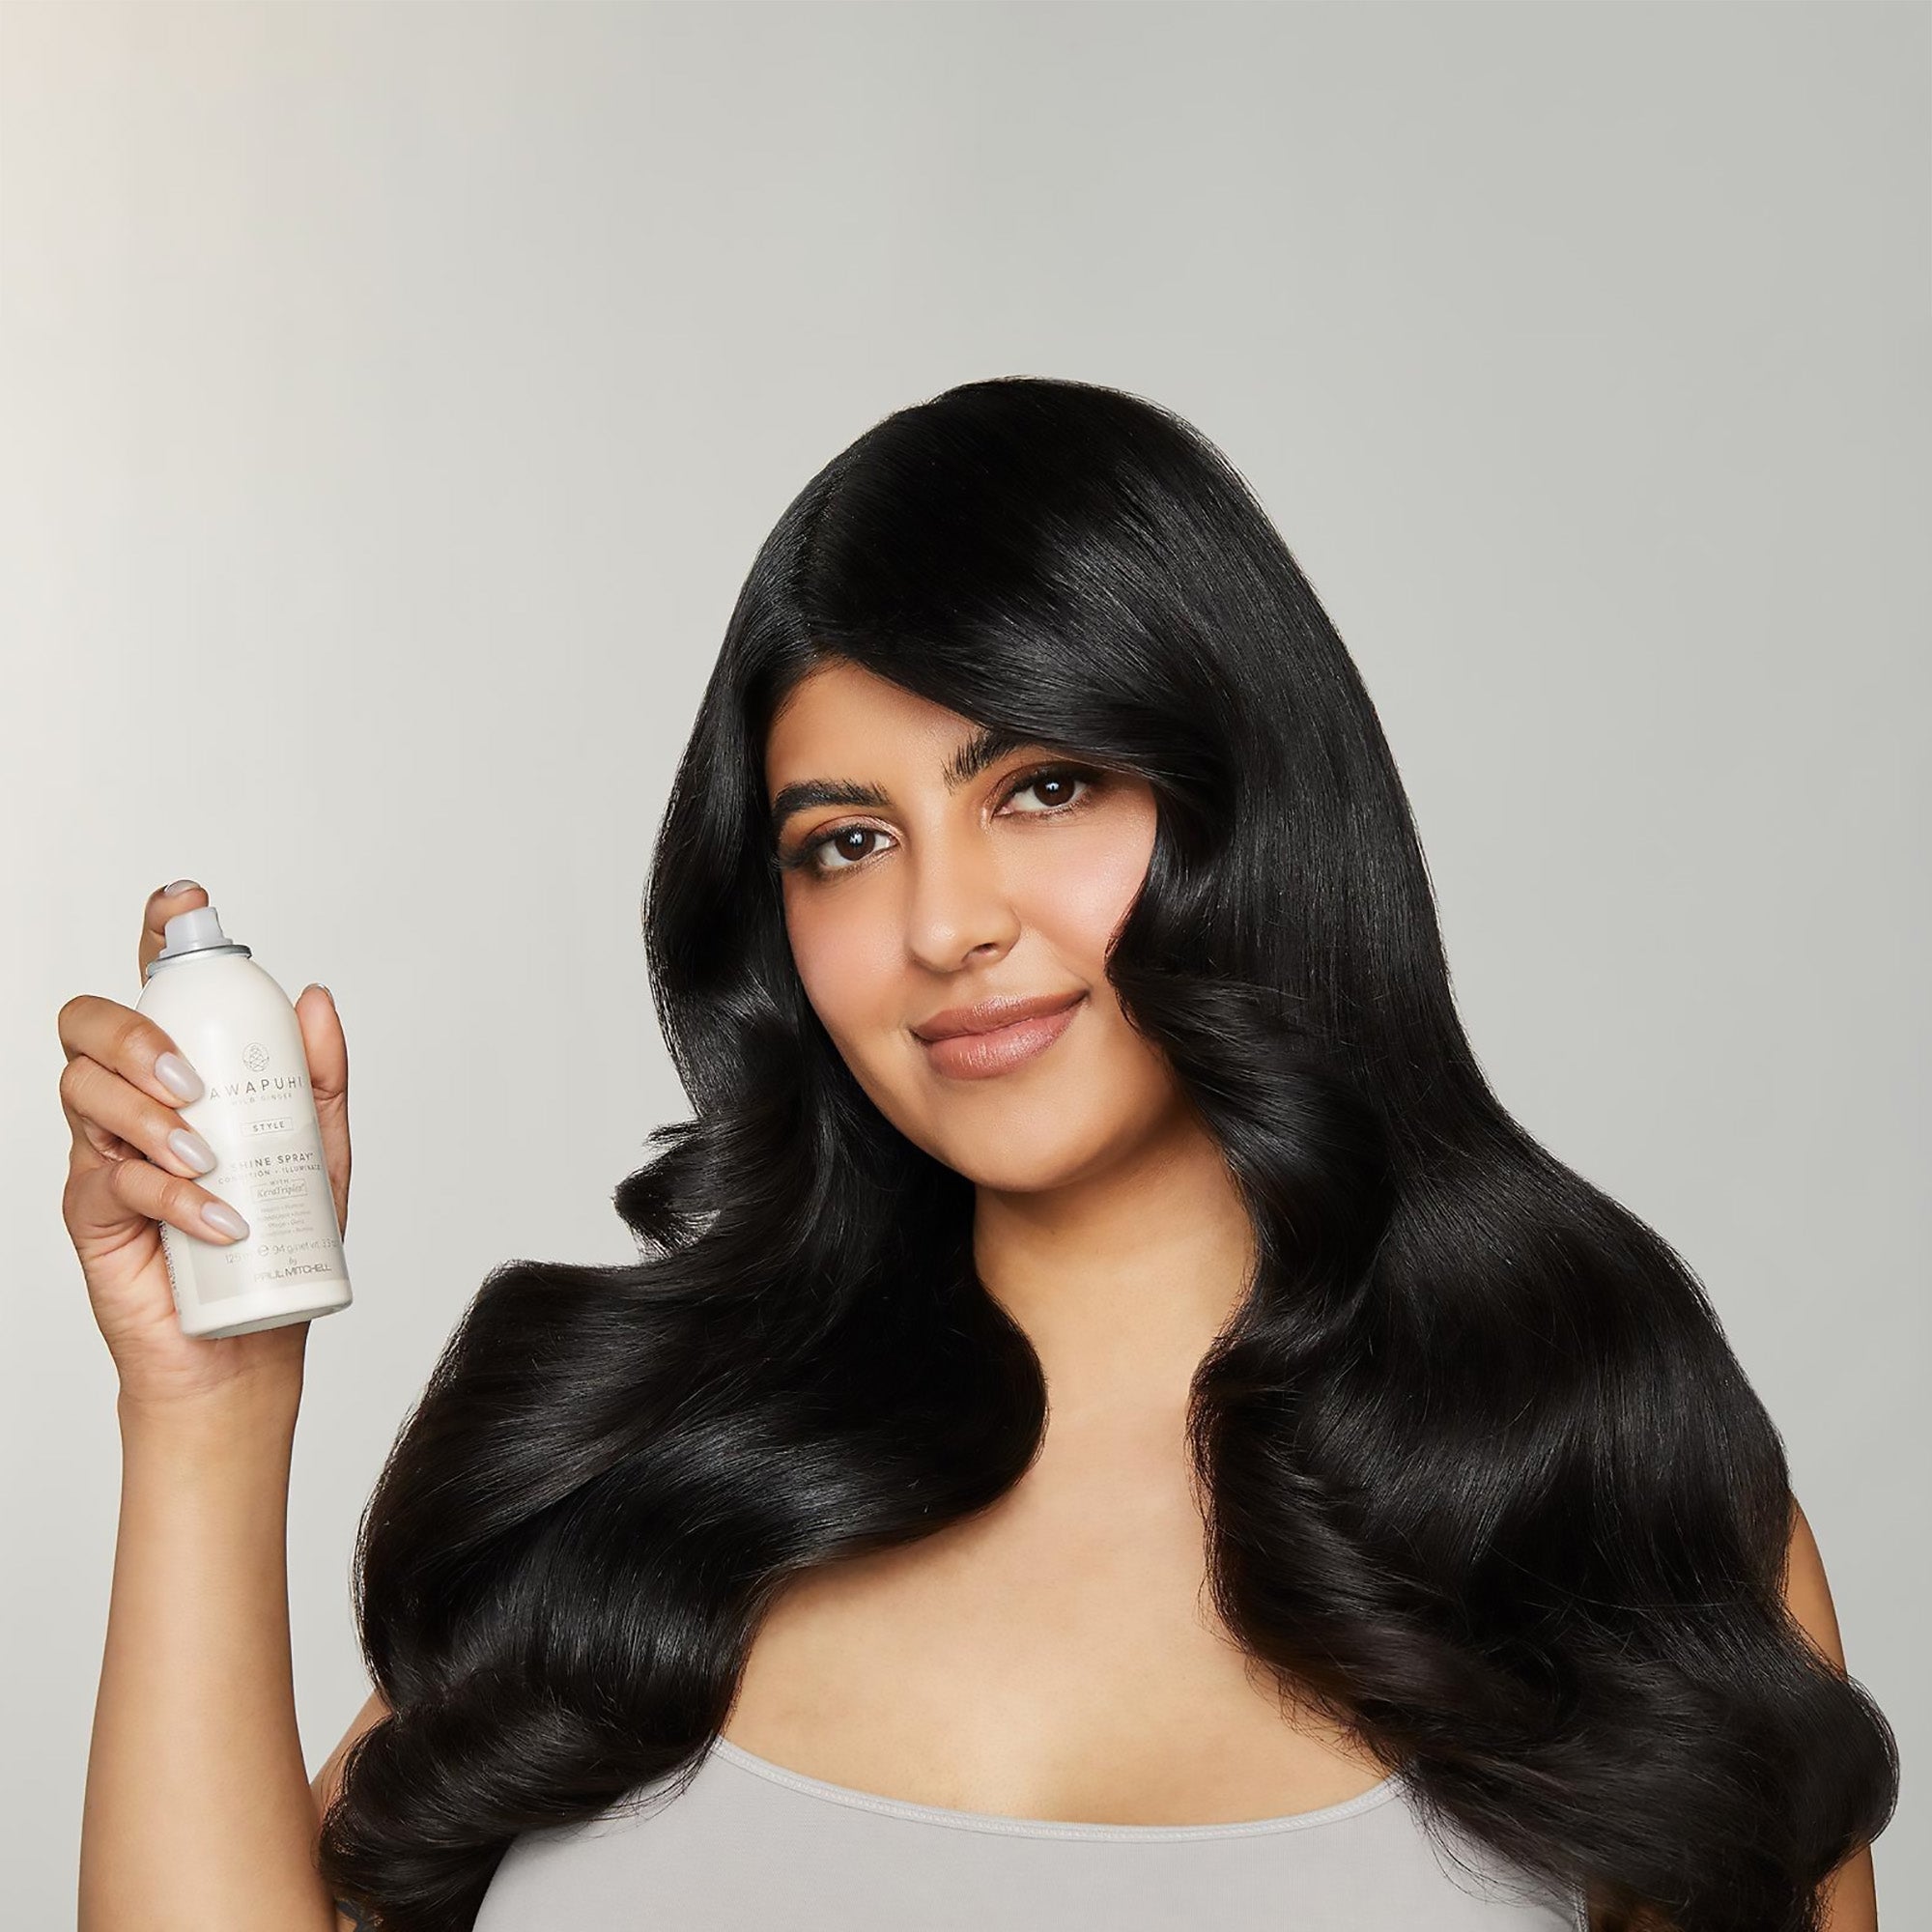 Ouidad Going Up! Volumizing Texture Spray Breathes Life Into Fine